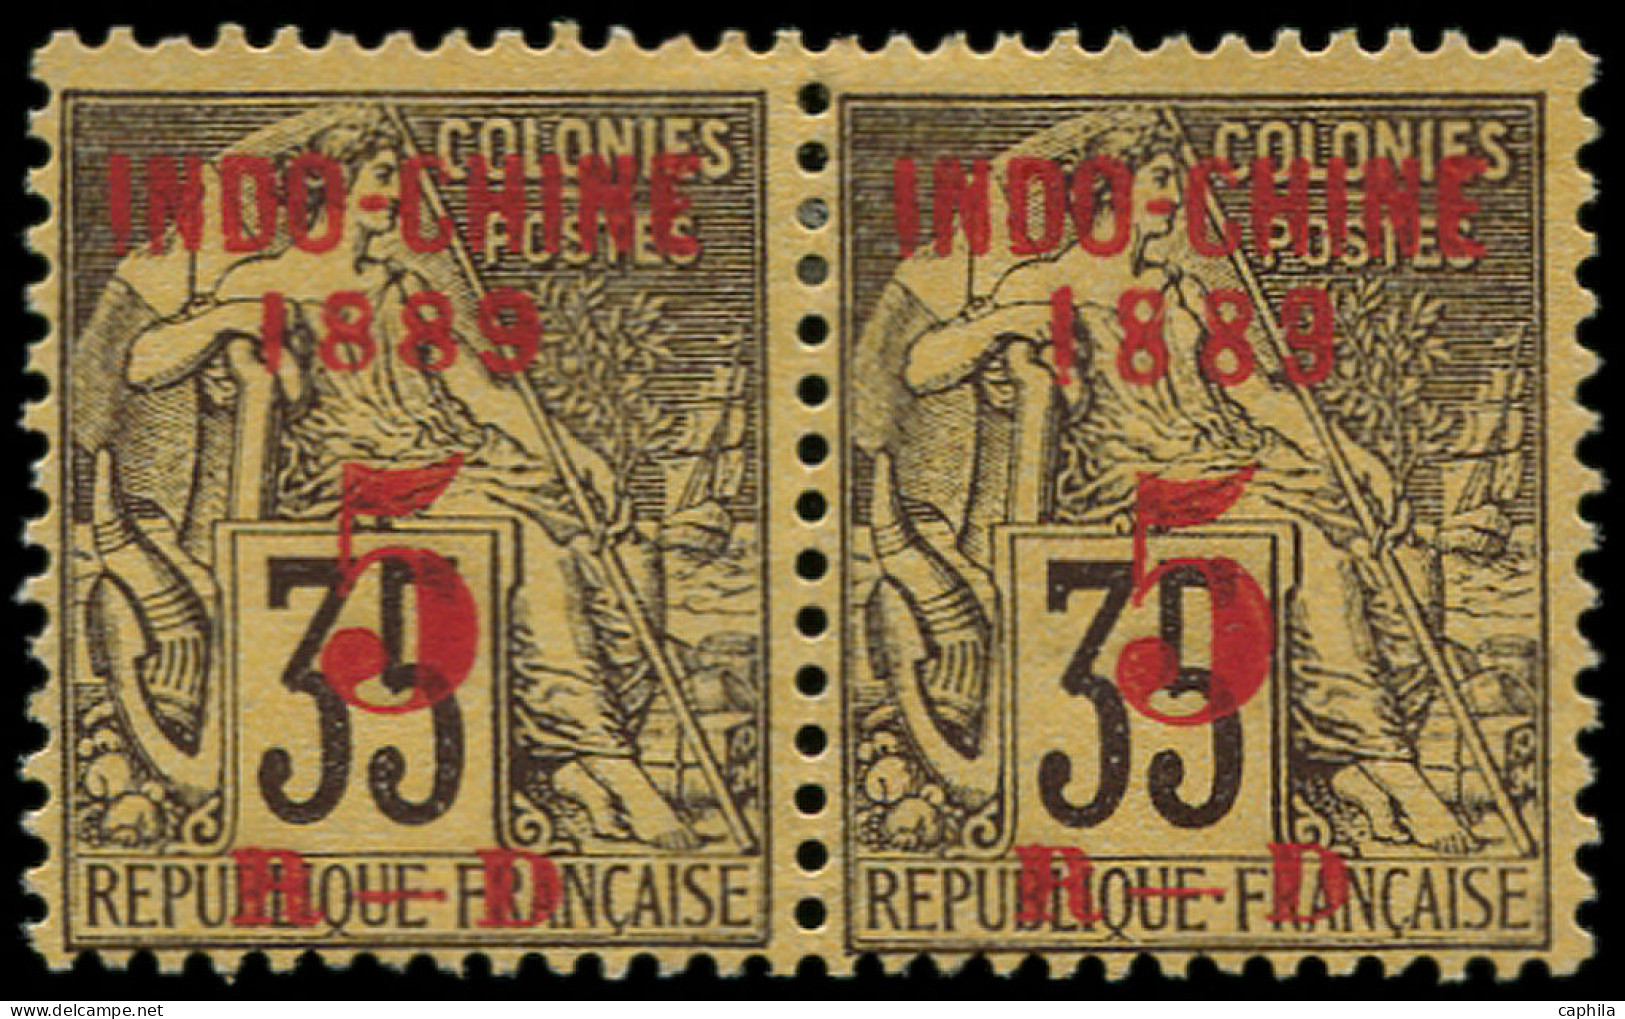 (*) INDOCHINE - Poste - 1aa, Paire Horizontale, Chiffres Plus Petits Tenant à Normal - Unused Stamps